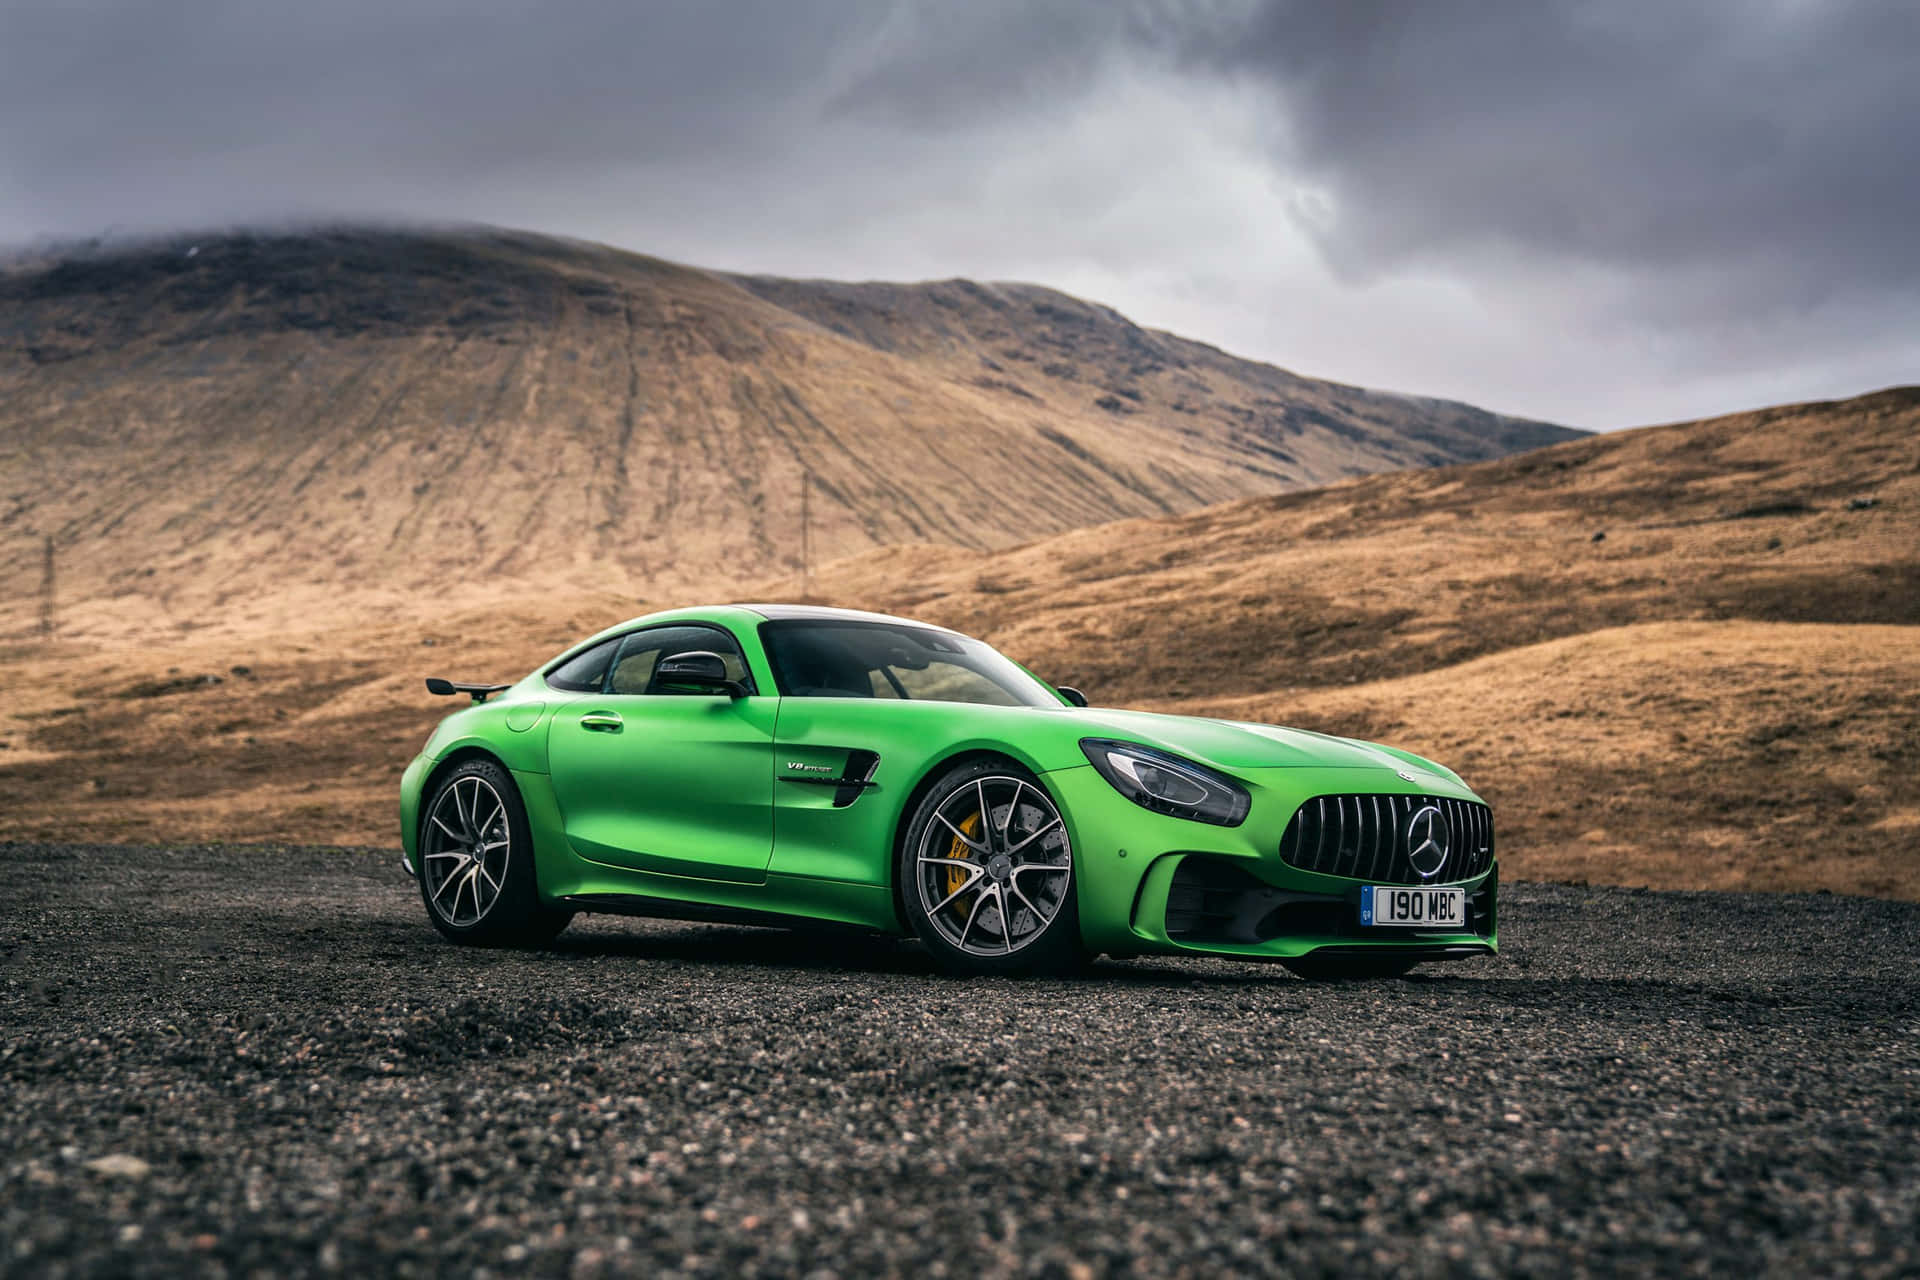 Mercedes Benz AMG GT R With Brownhill Side Background